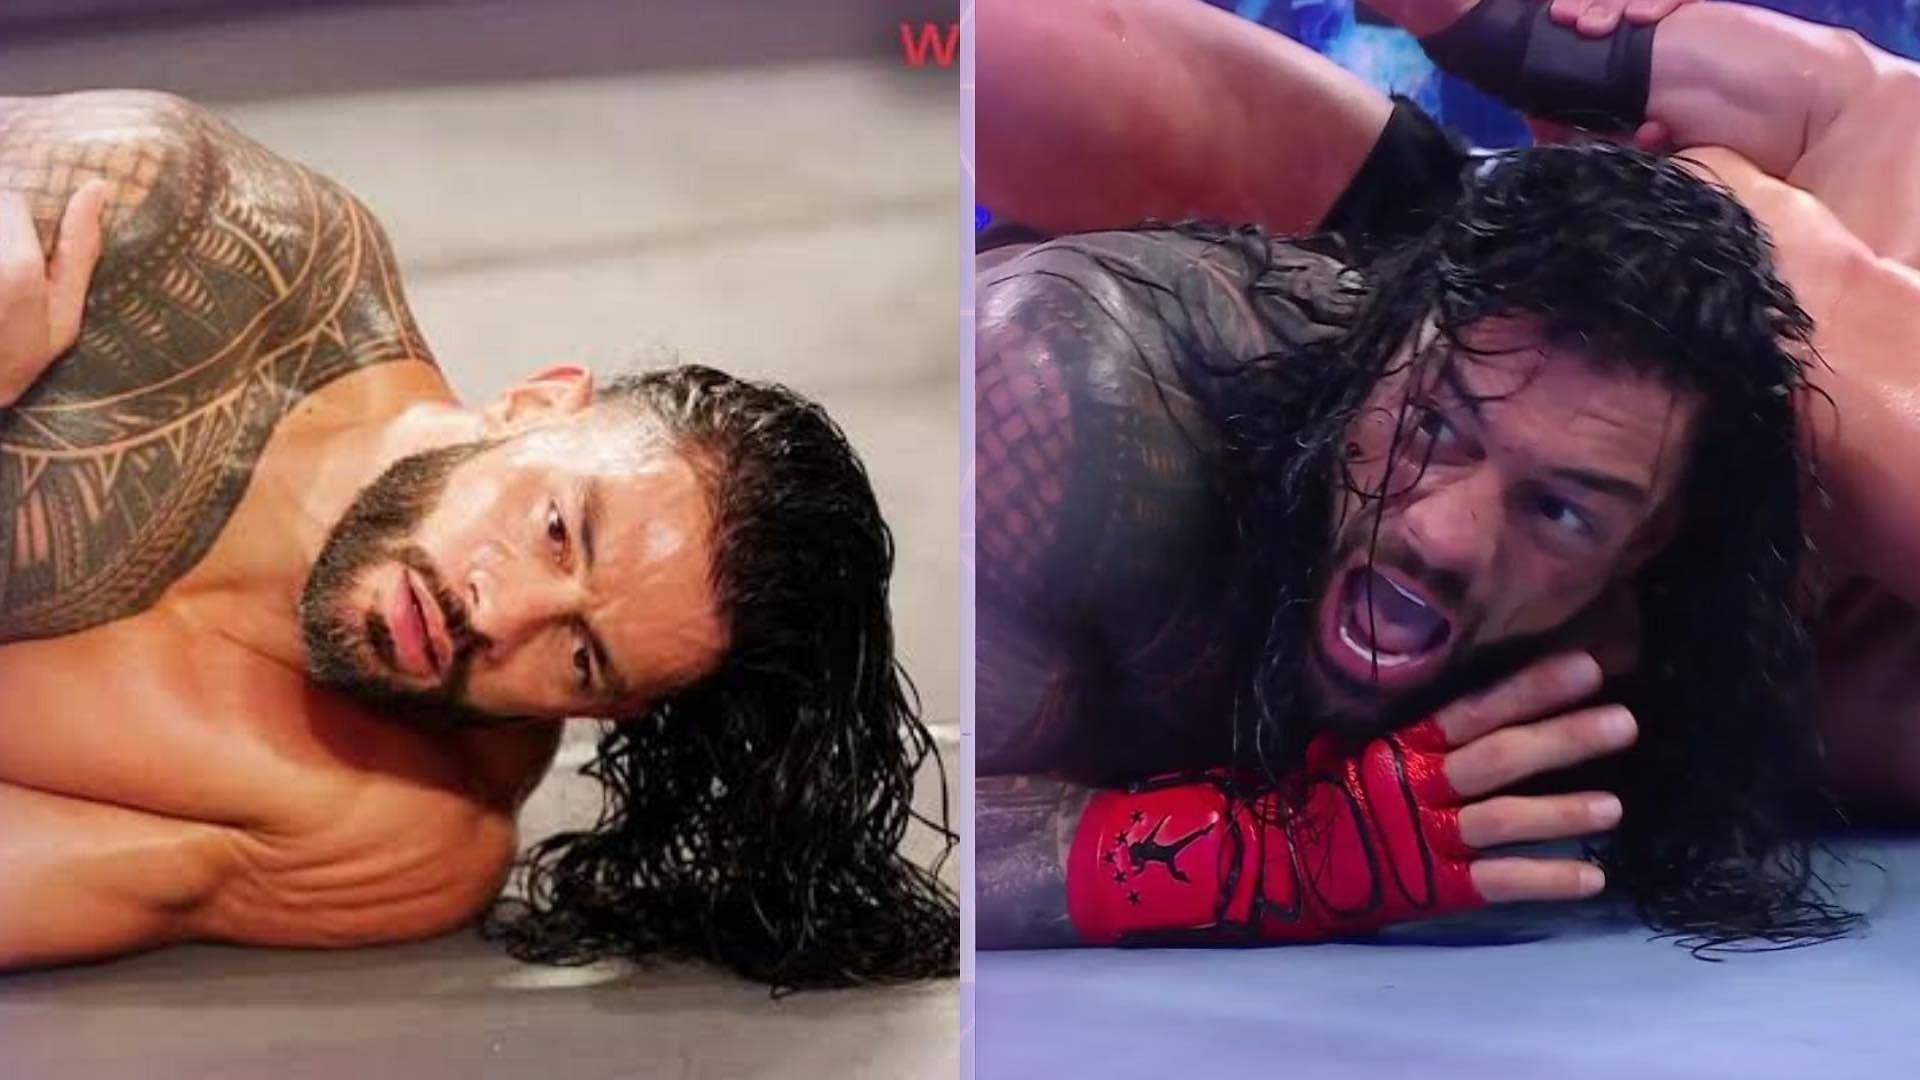 Roman Reigns has had a handful of injuries since turning heel in WWE